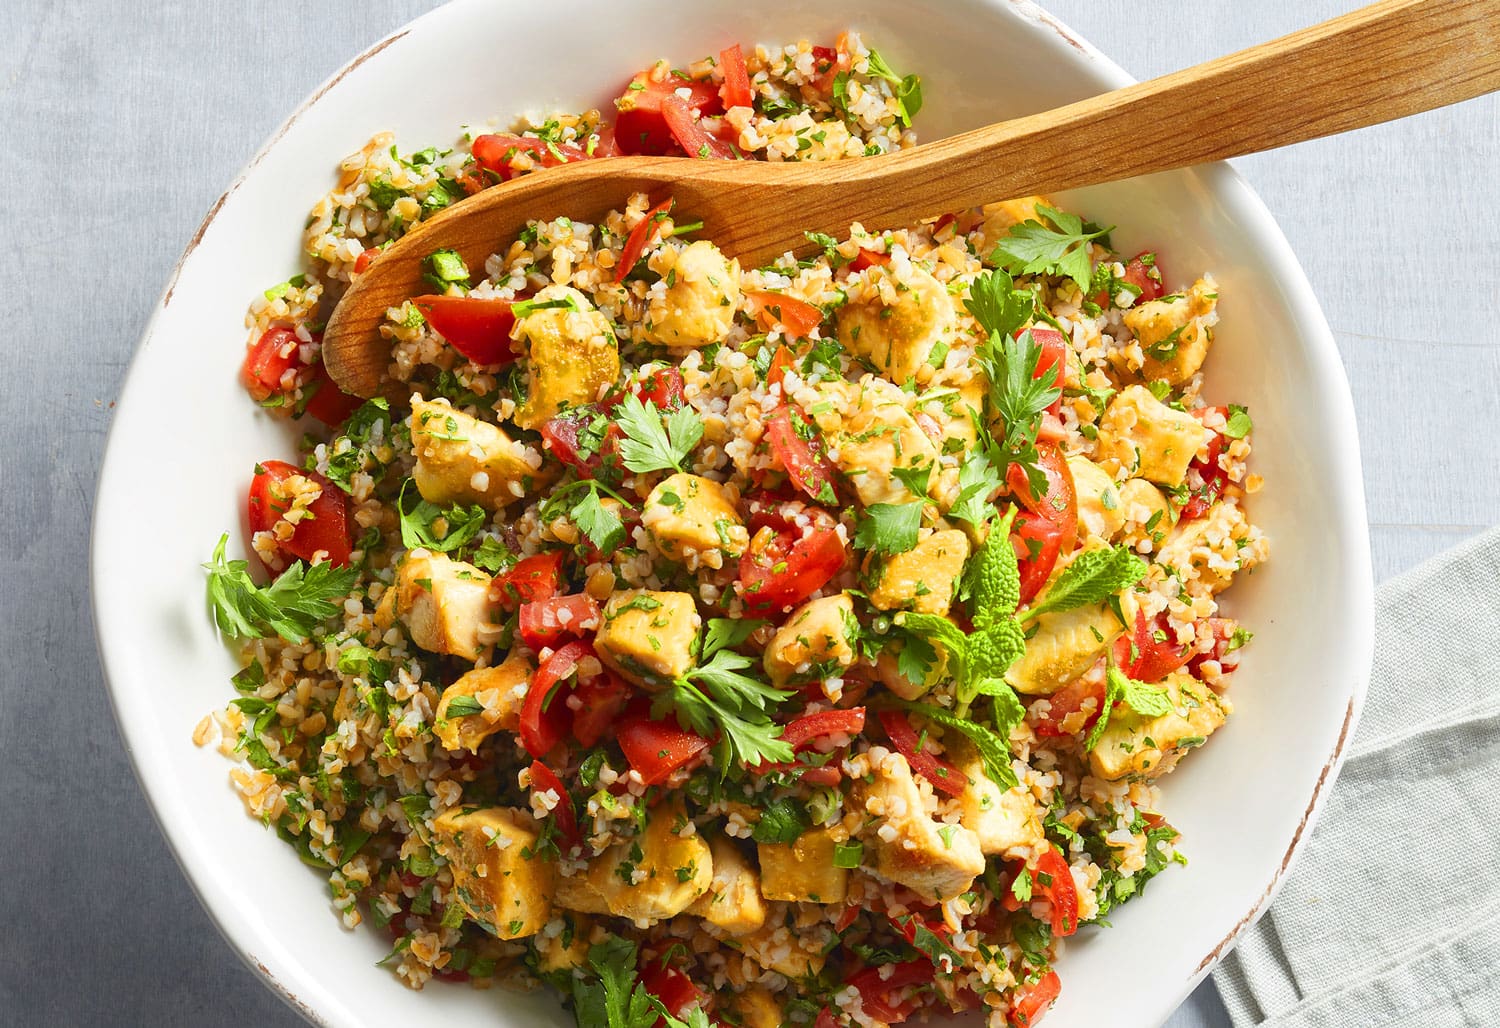 Parsley tabbouleh with pan-seared chicken: